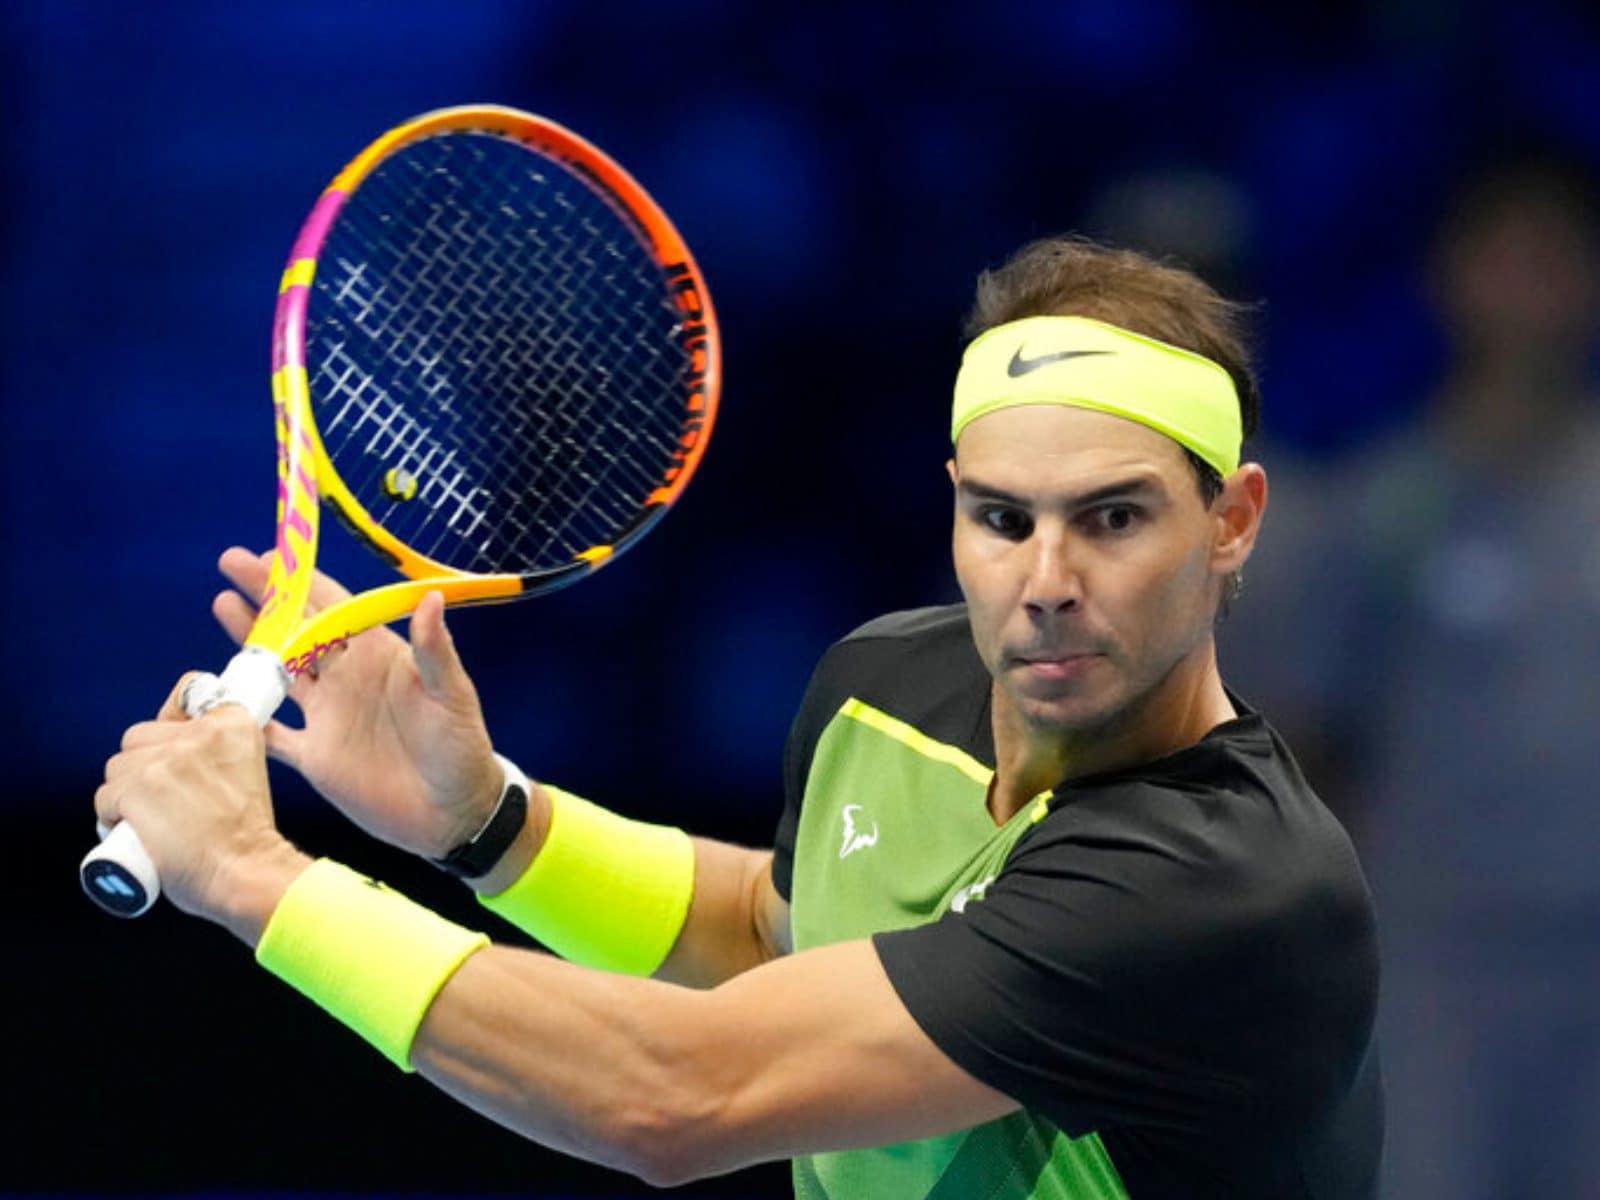 Nadal happy to win in return but says confidence still recovering